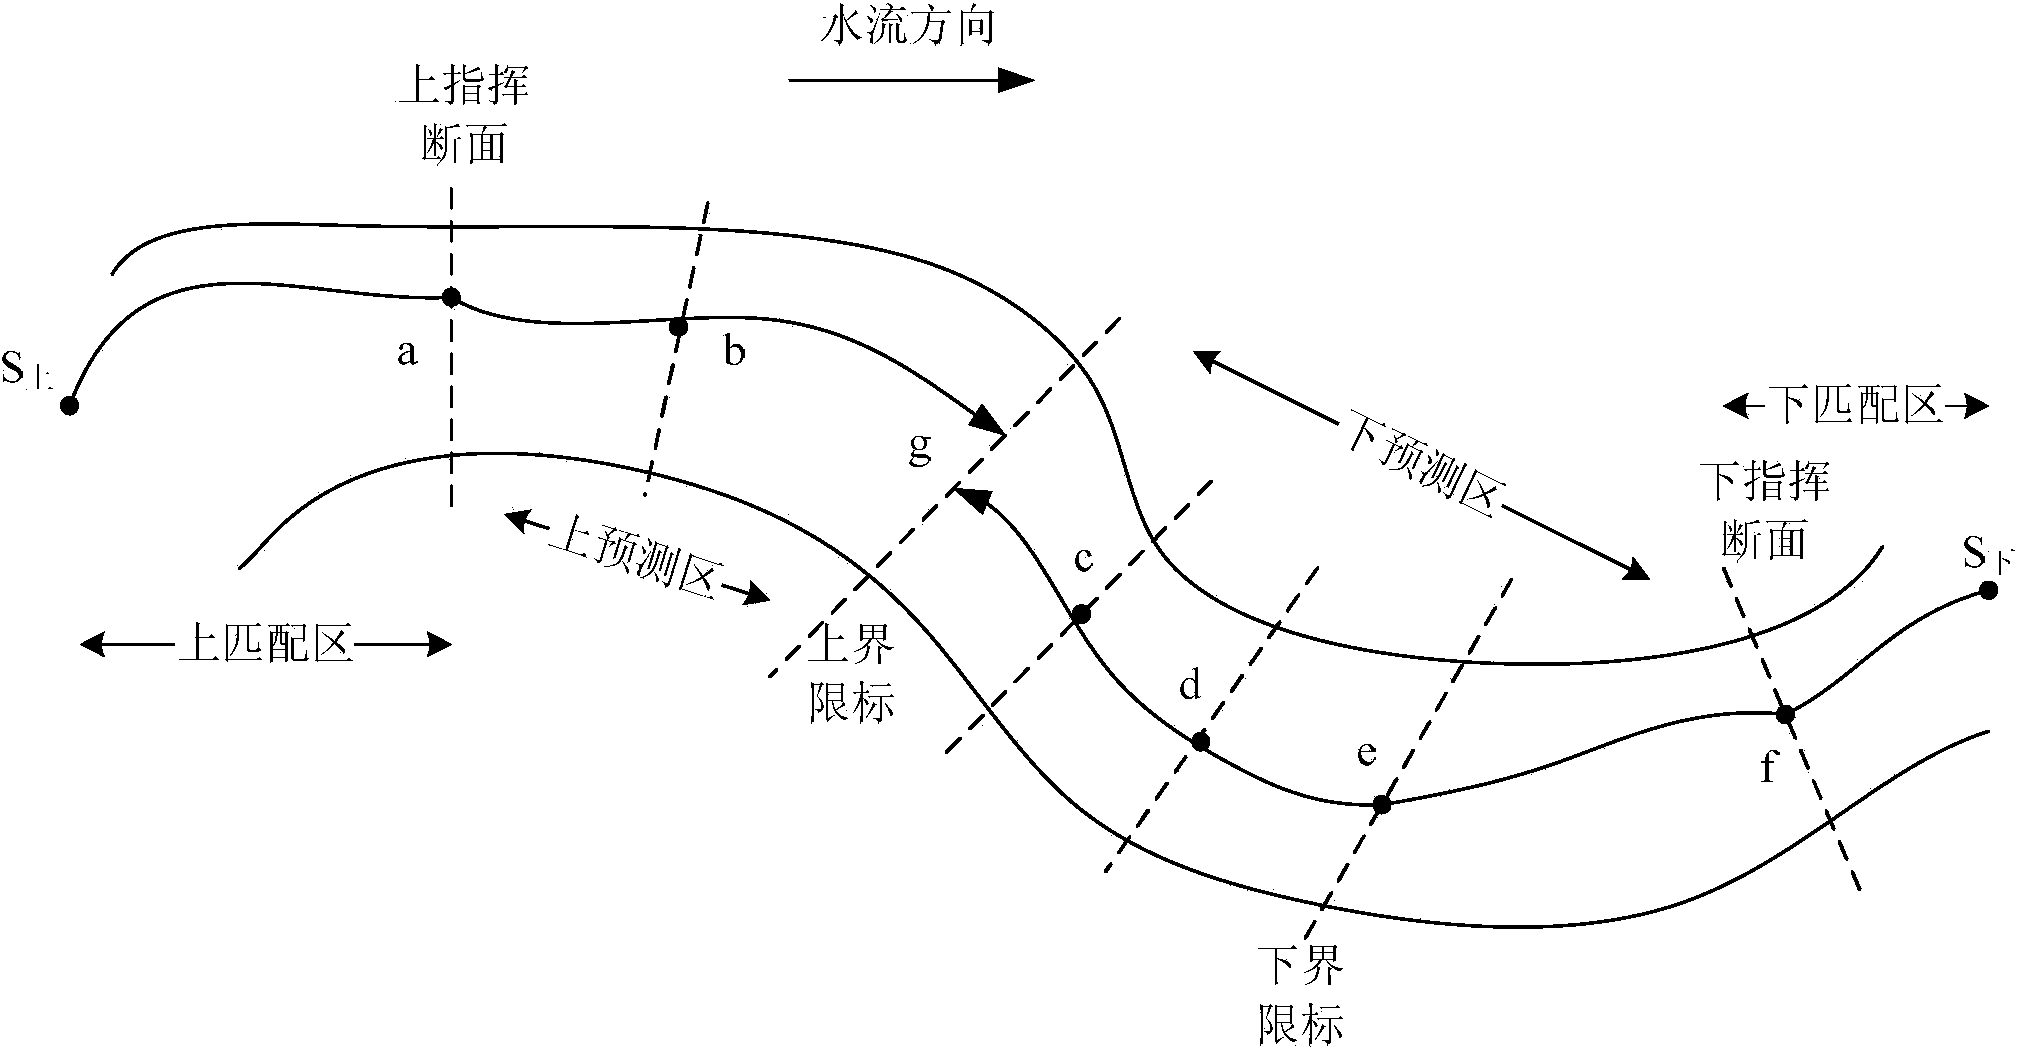 Point-to-point ship sailing time estimation method based on ship route matching